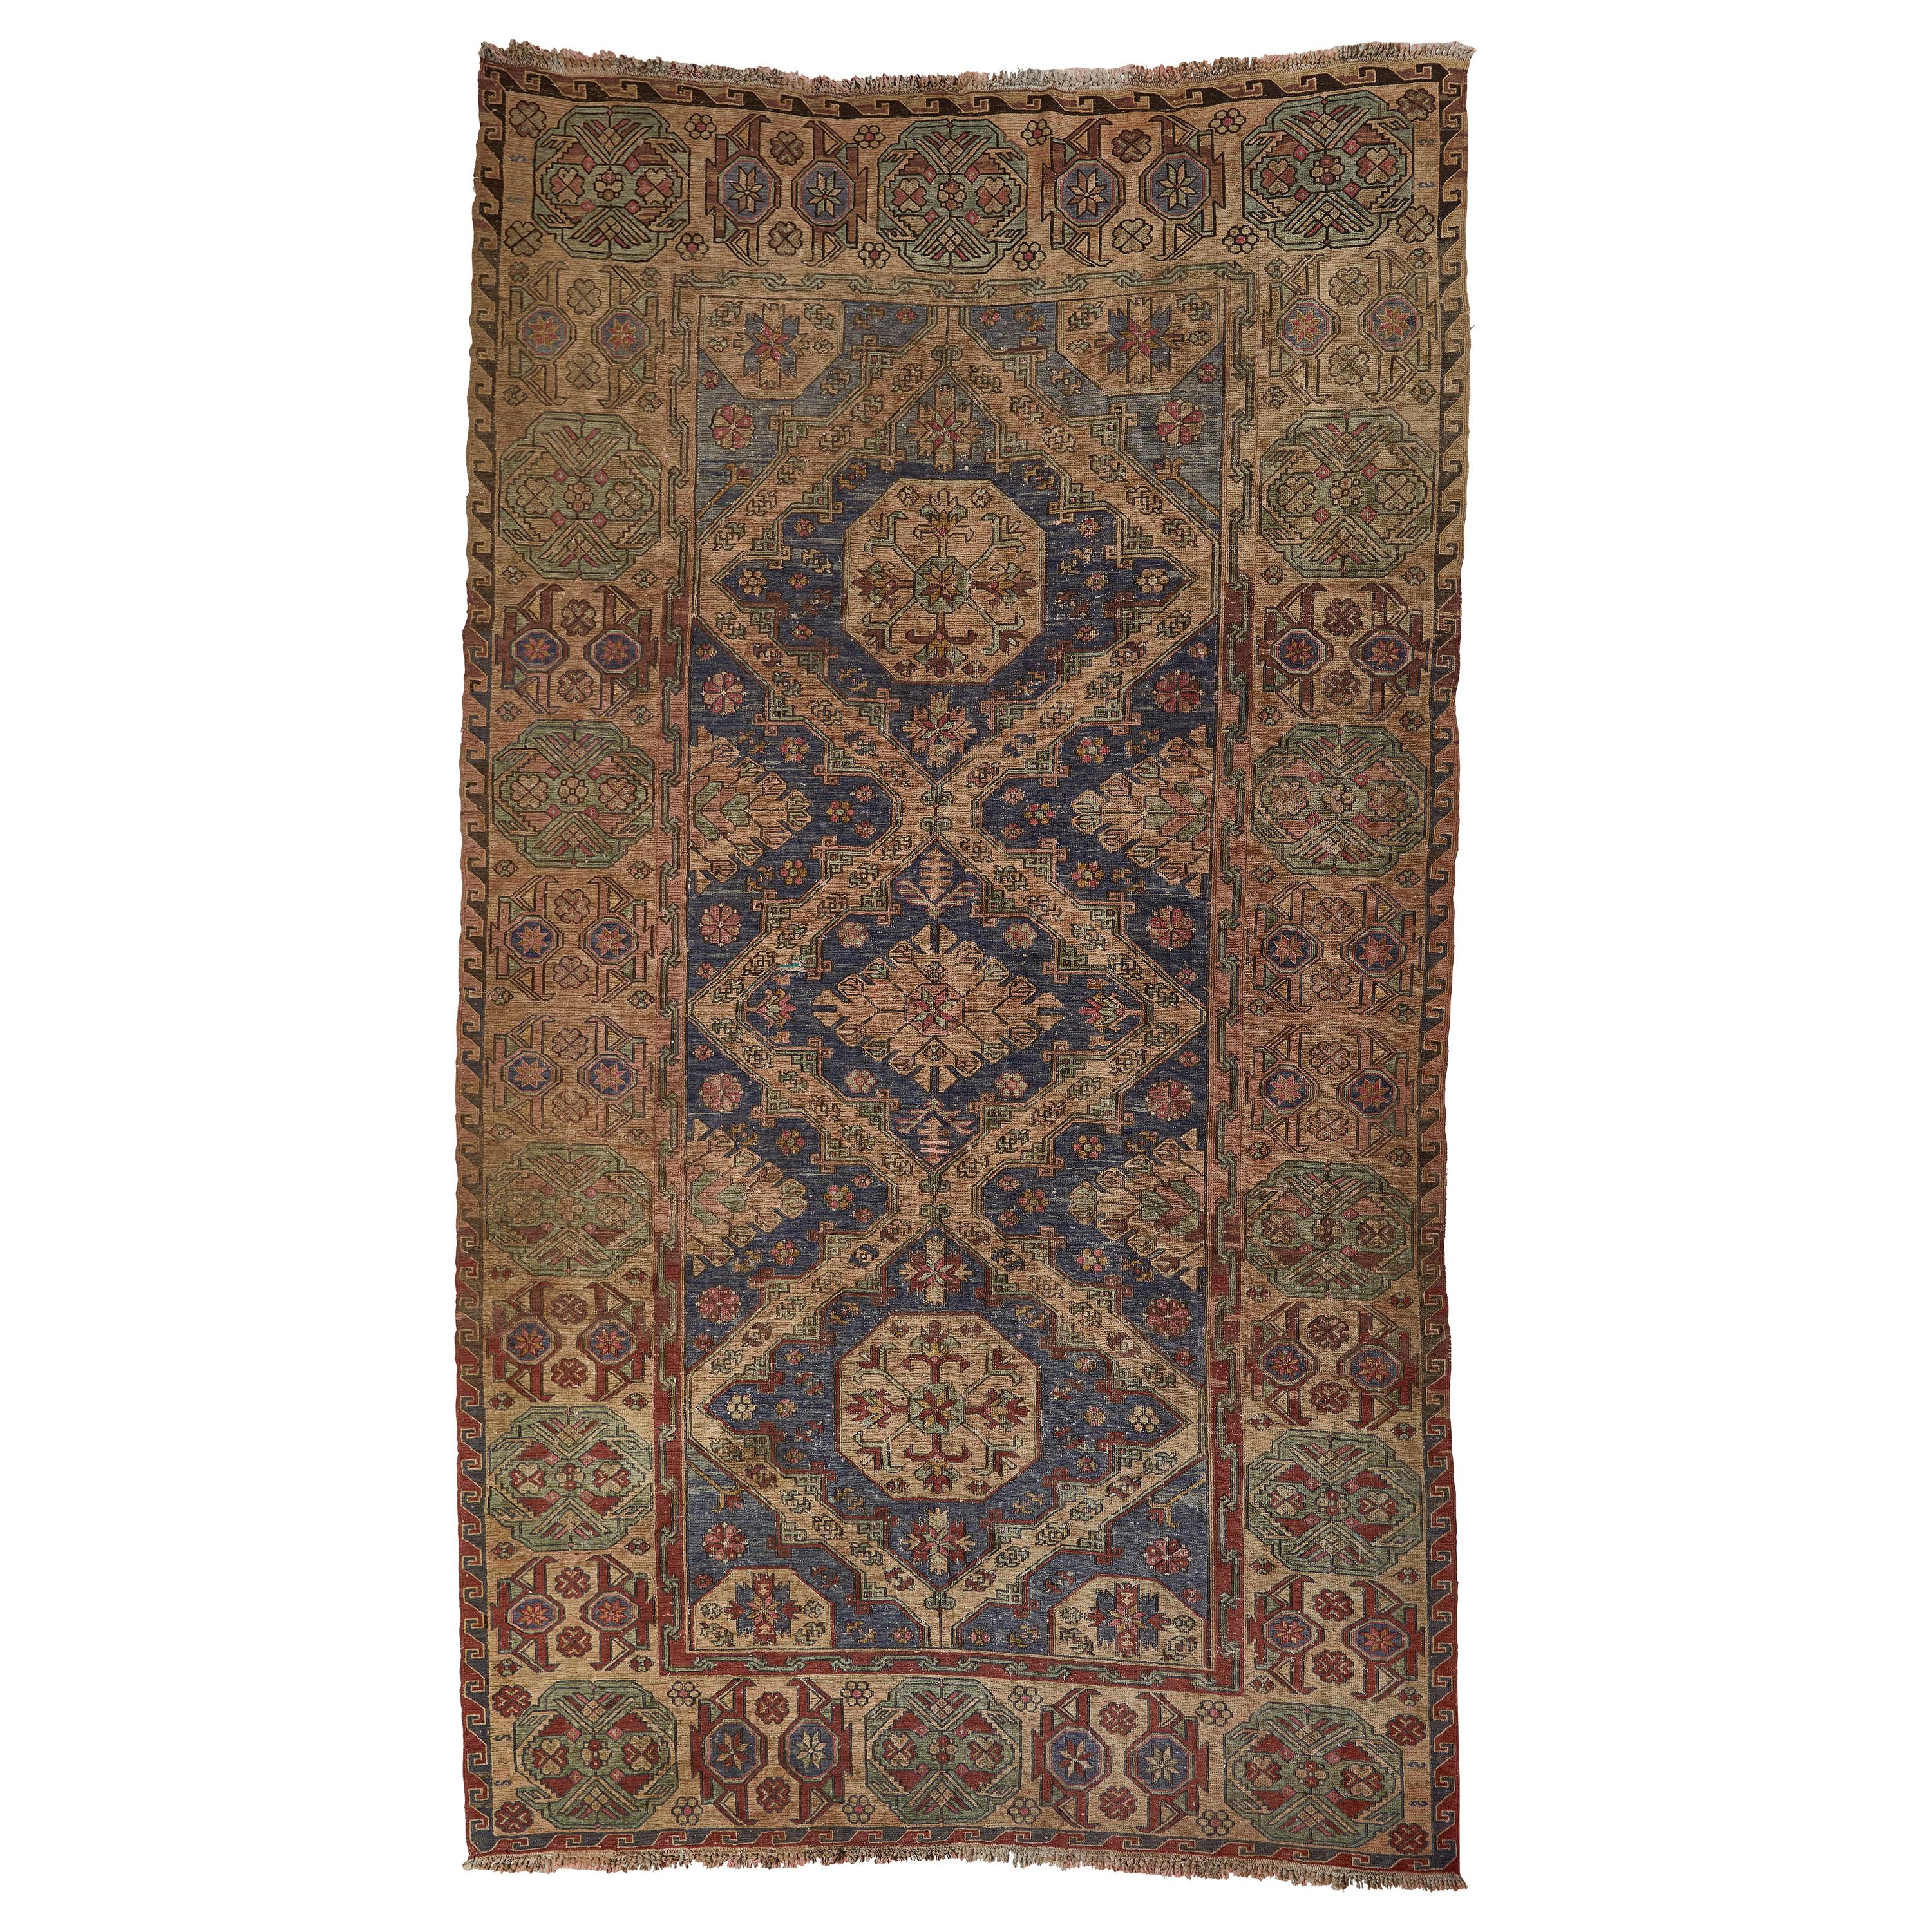 Large Antique Caucasian Rug with Intricate Details